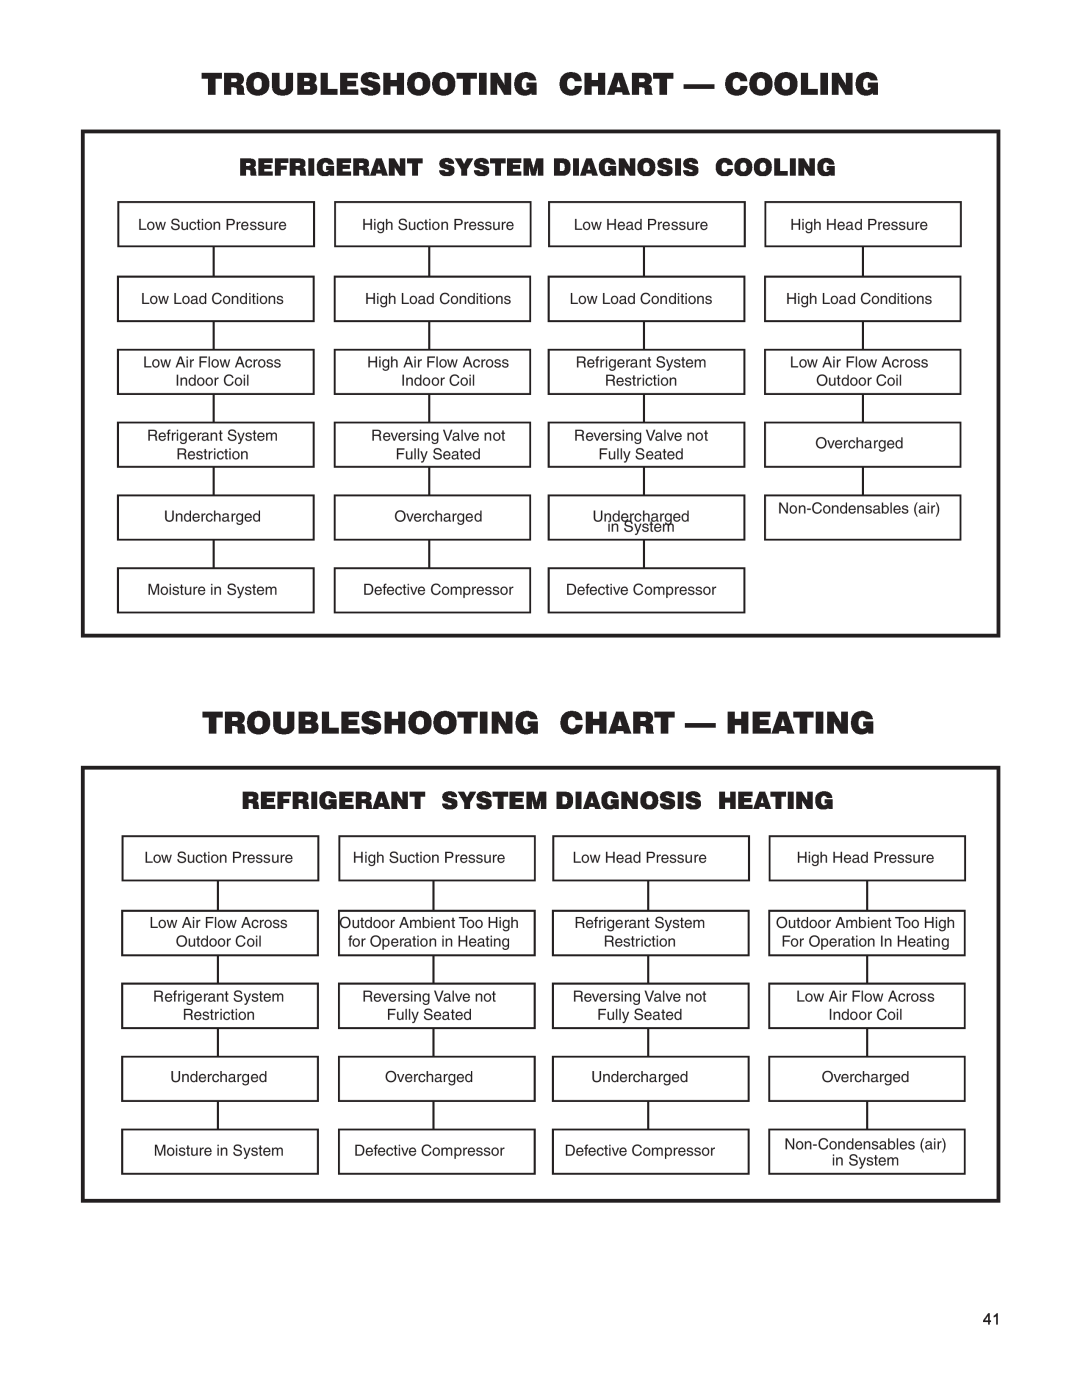 Friedrich V(E Troubleshooting Chart - Cooling, Troubleshooting Chart - Heating, Refrigerant System Diagnosis Cooling 